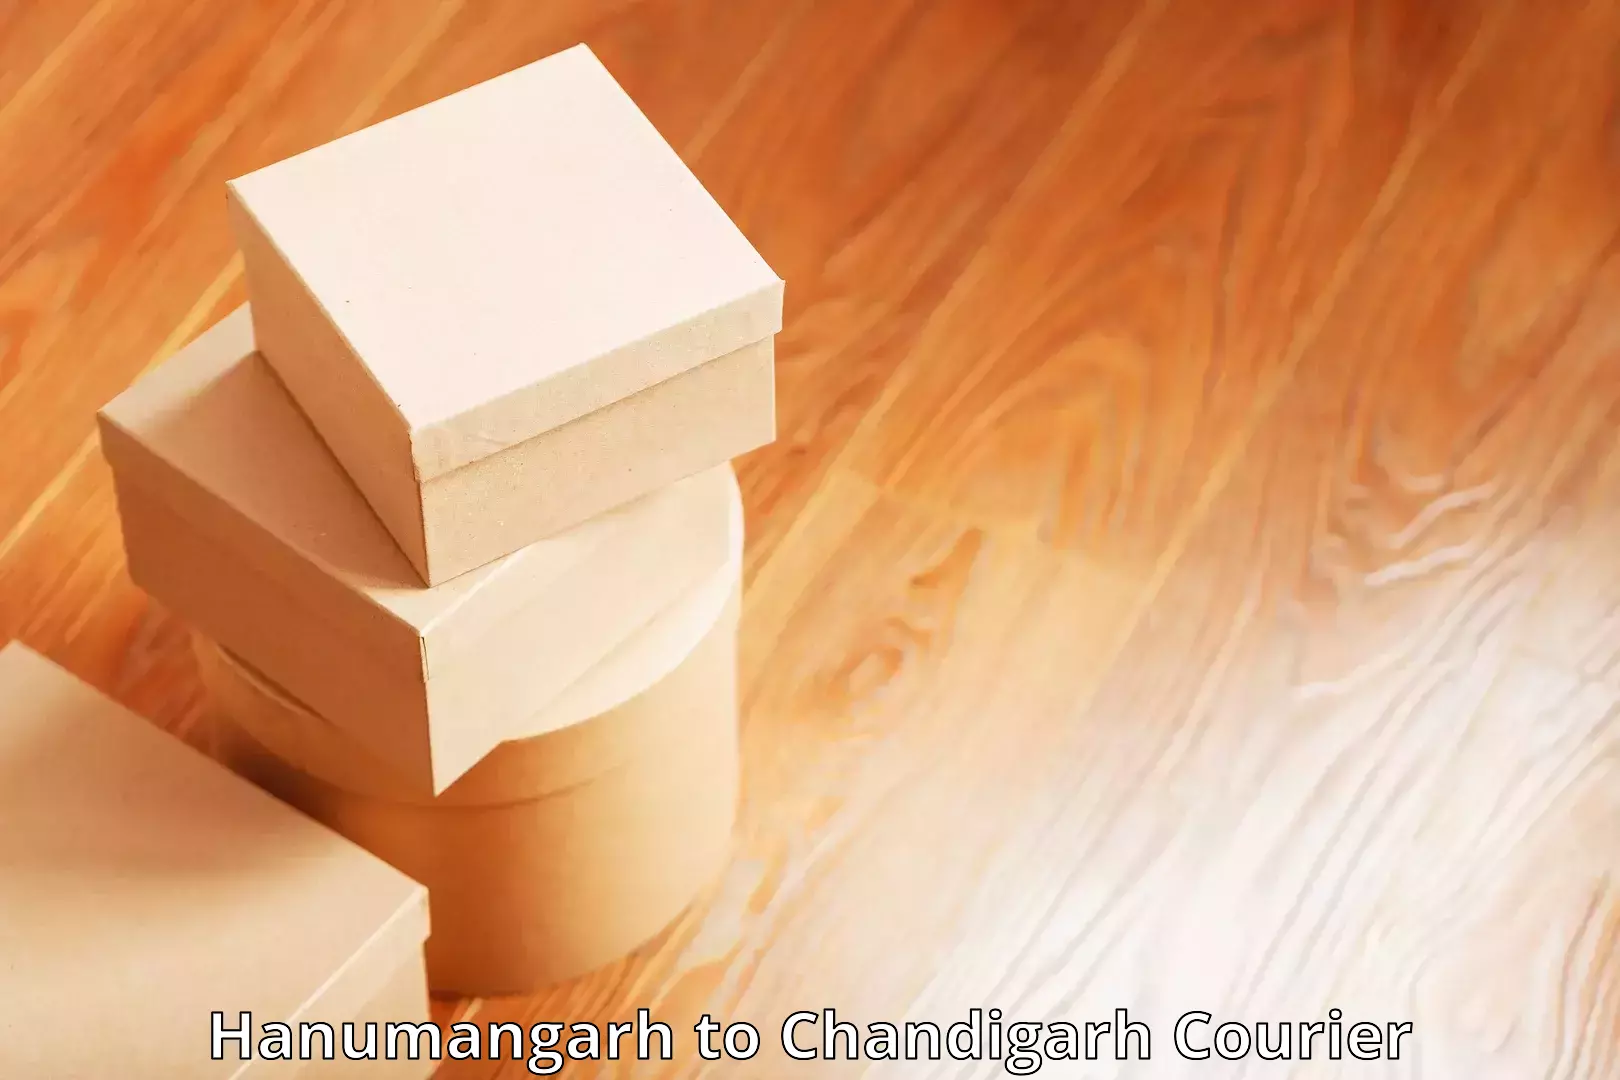 State-of-the-art courier technology Hanumangarh to Chandigarh